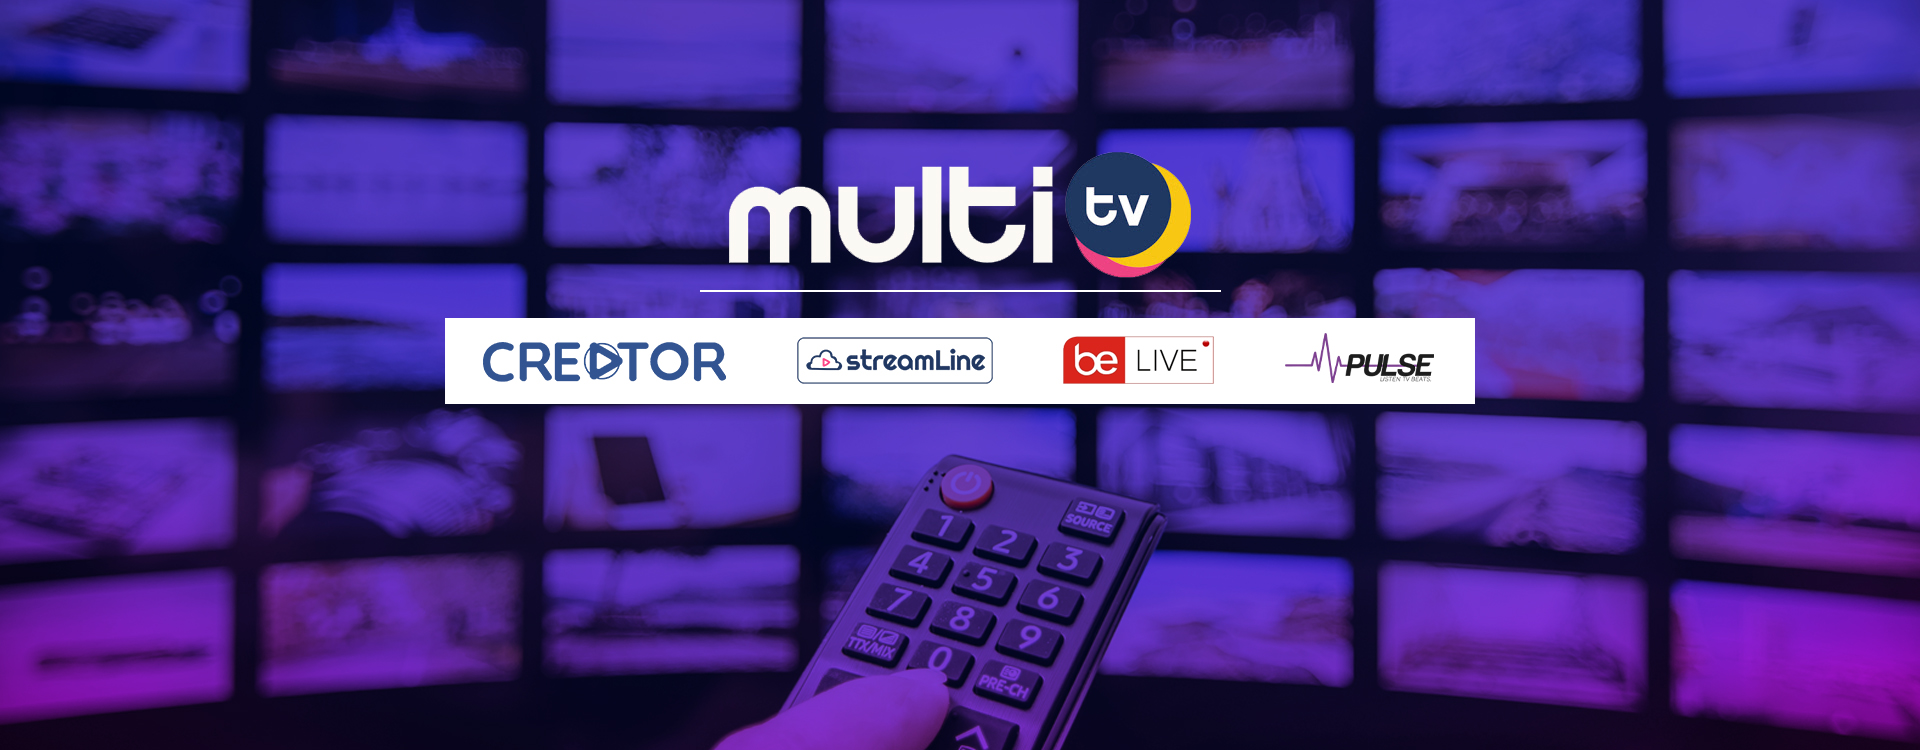 MultiTV- A Video Tech Startup and its services